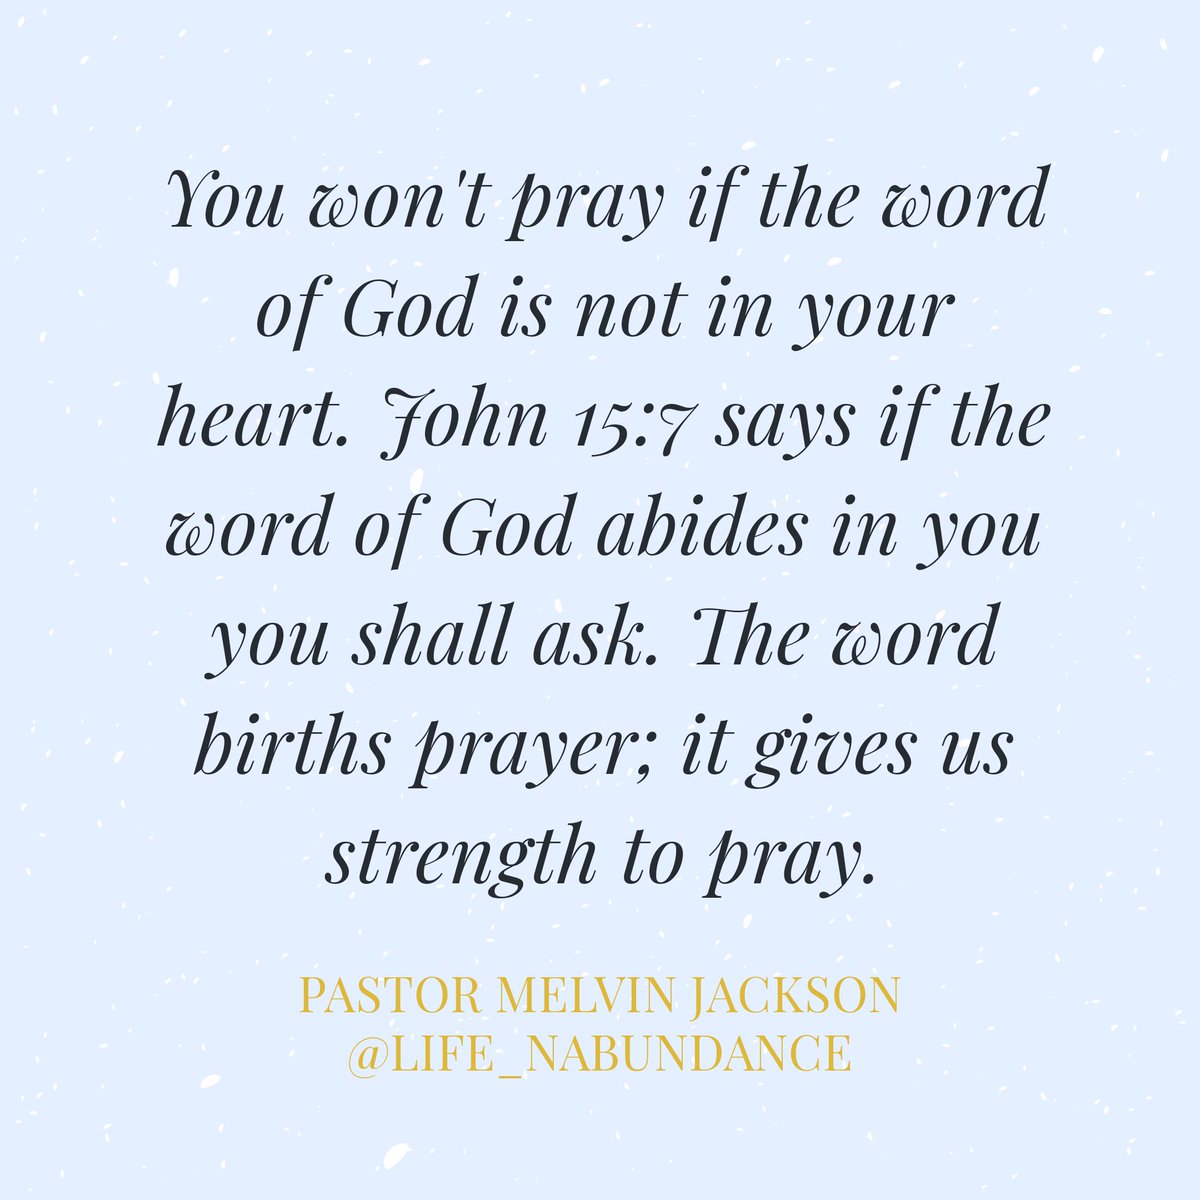 You won't pray if the word of God is not in your heart. John 15:7 says if the word of God abides in you you shall ask; the word births prayer. It gives us strength to pray. #praywithoutceasing #hidethewordinyourheart #fullycommitted #lifeinabundance #pastormelvinjackson